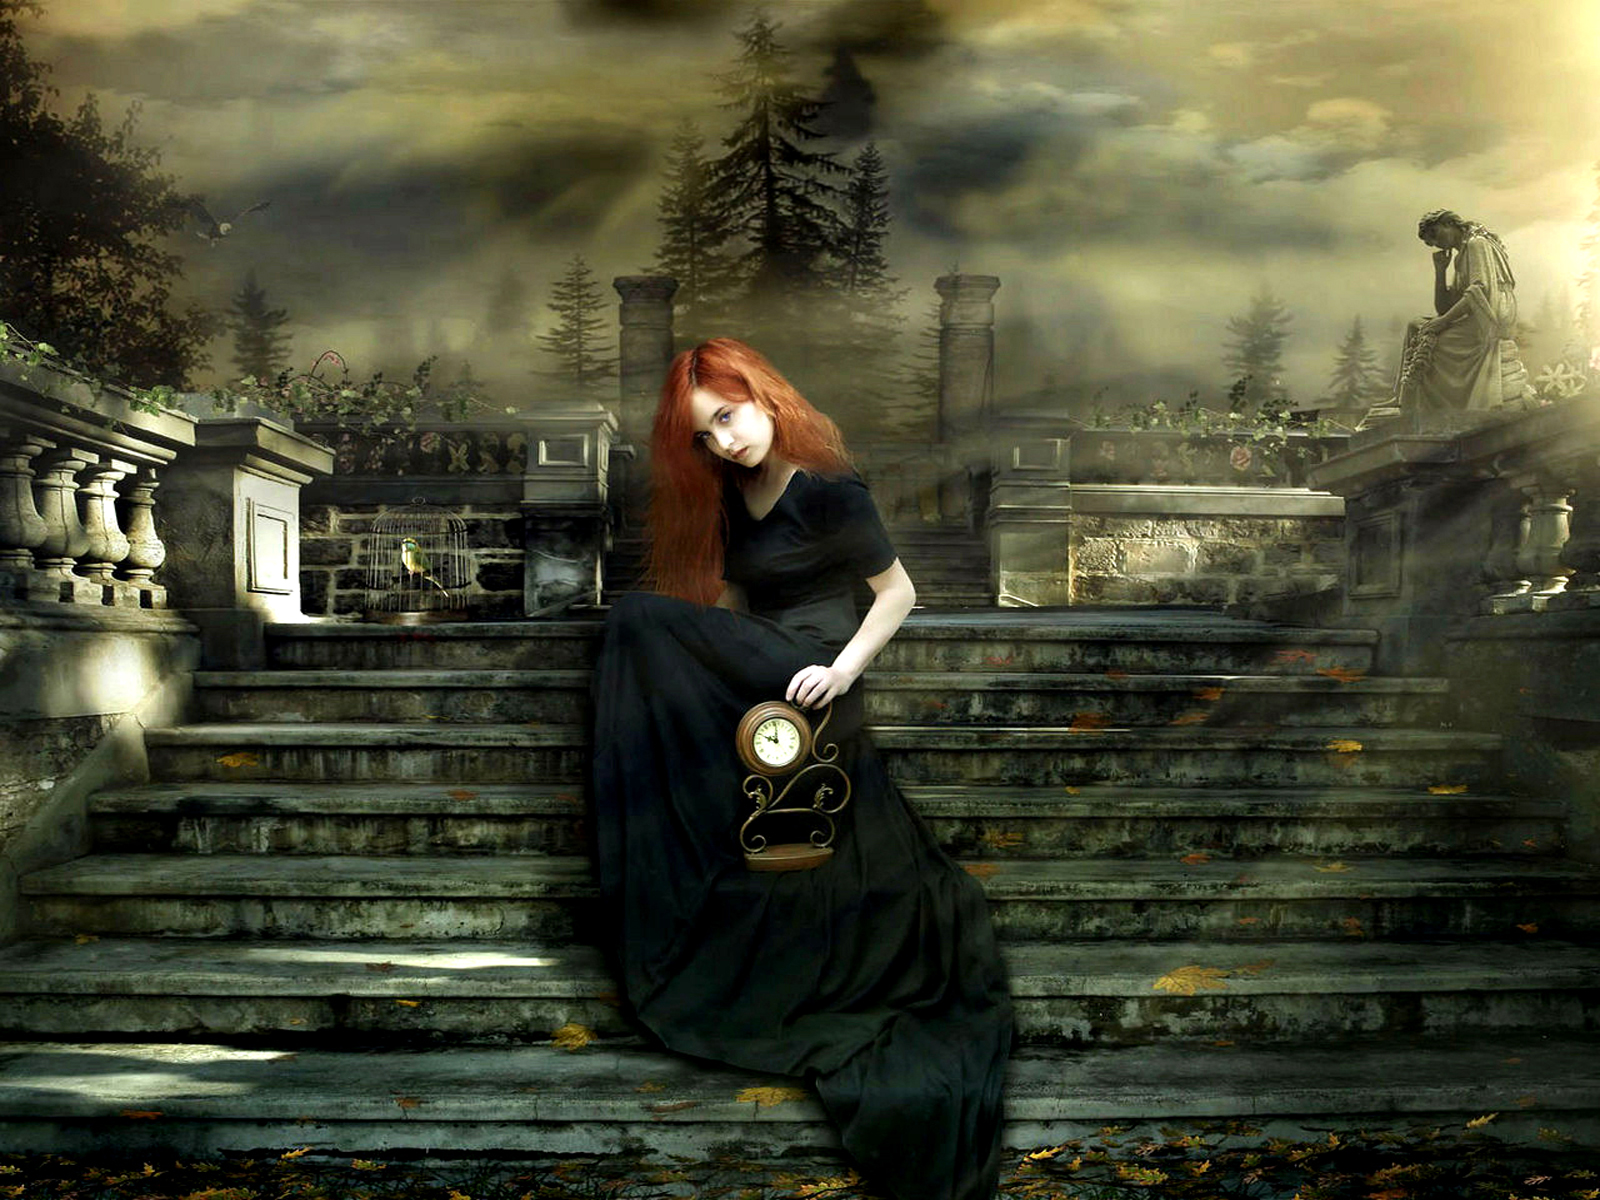 Gothic Art Wallpapers